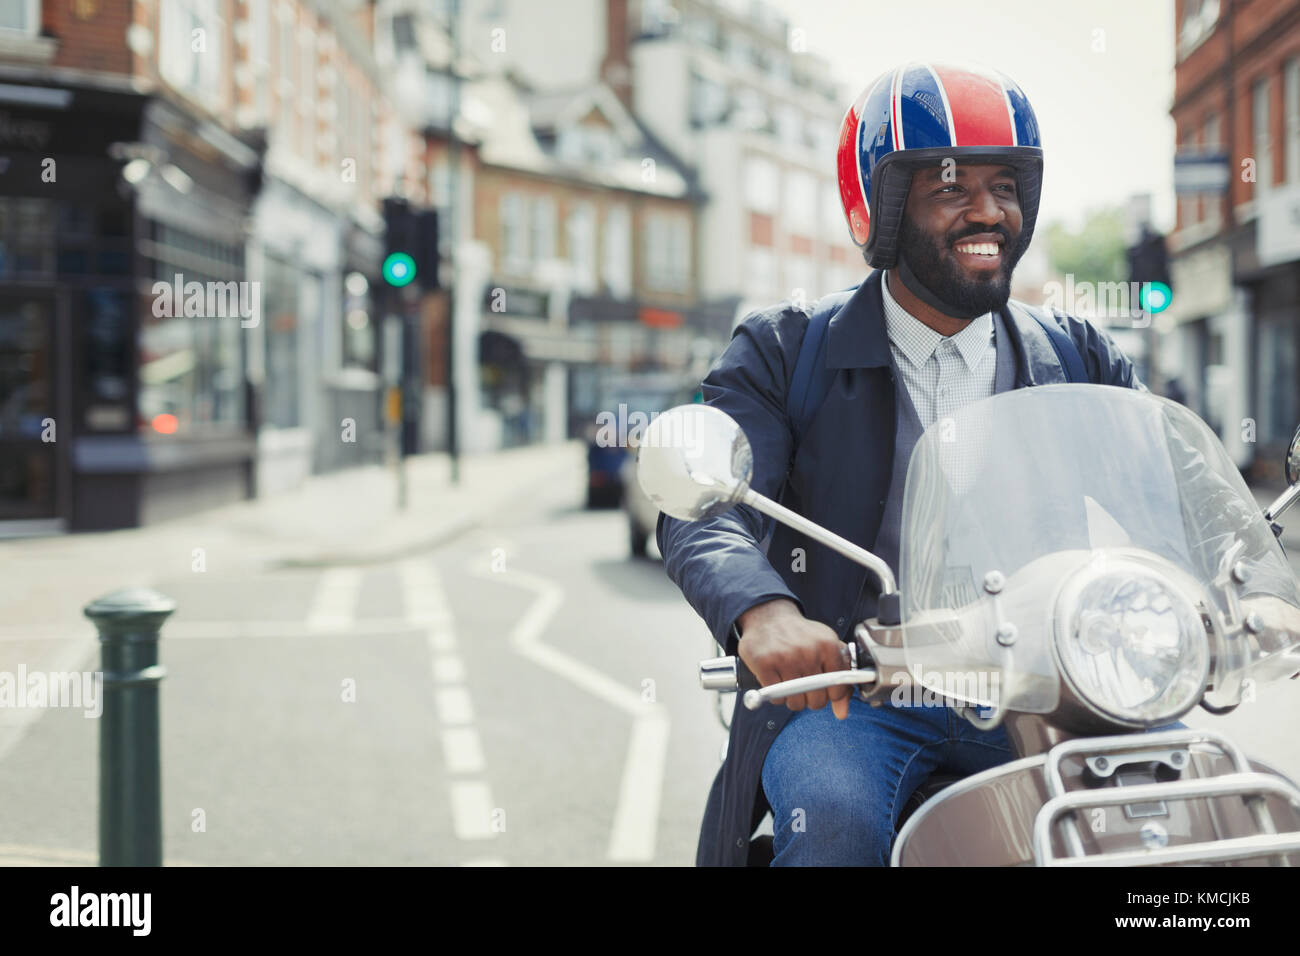 Smiling young businessman in helmet riding motor scooter on urban street Stock Photo